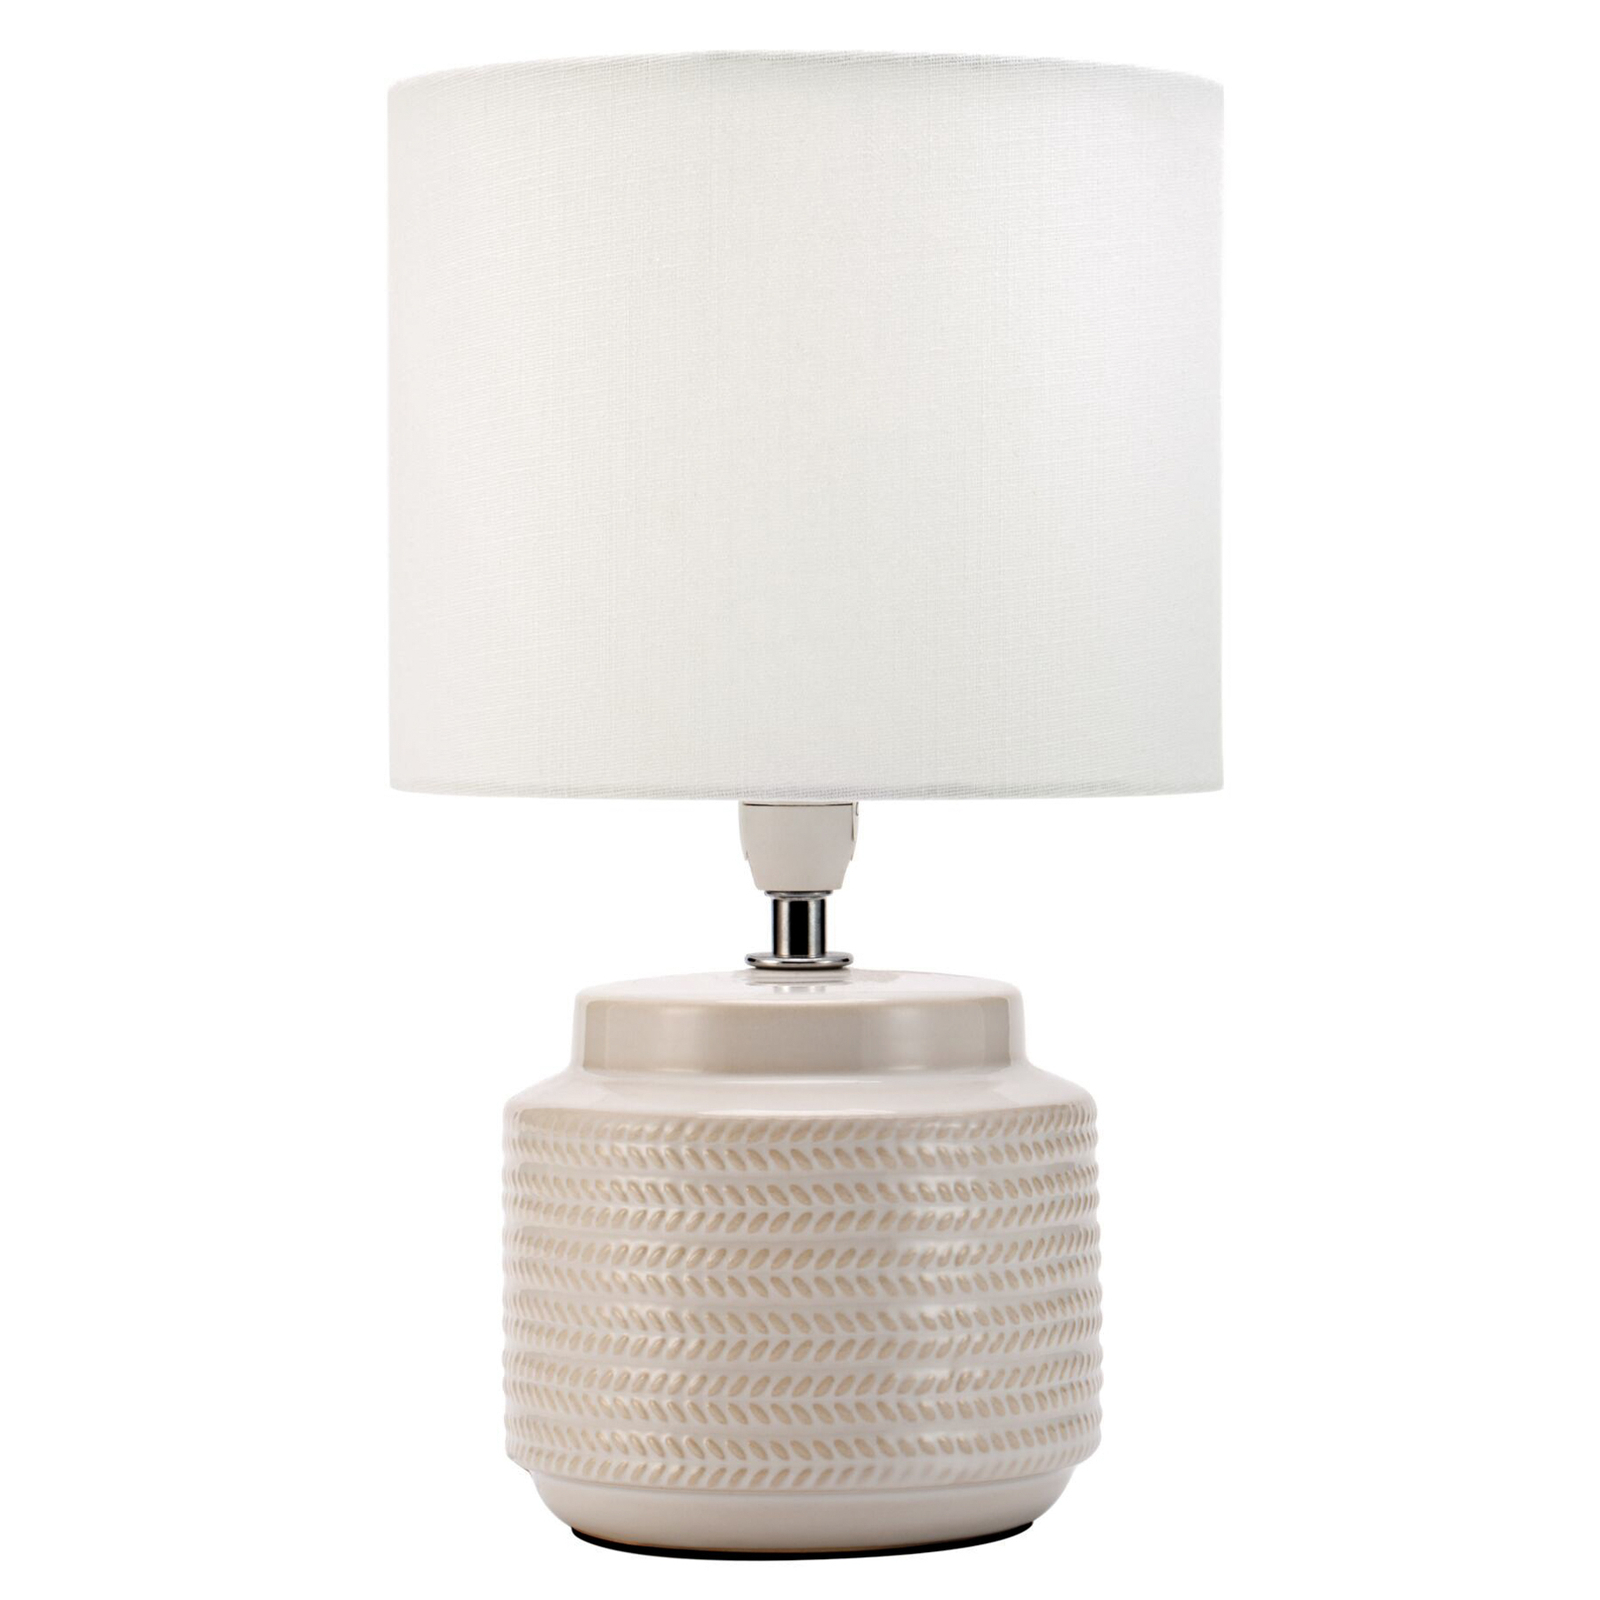 Pauleen Bright Soul table lamp with a ceramic base